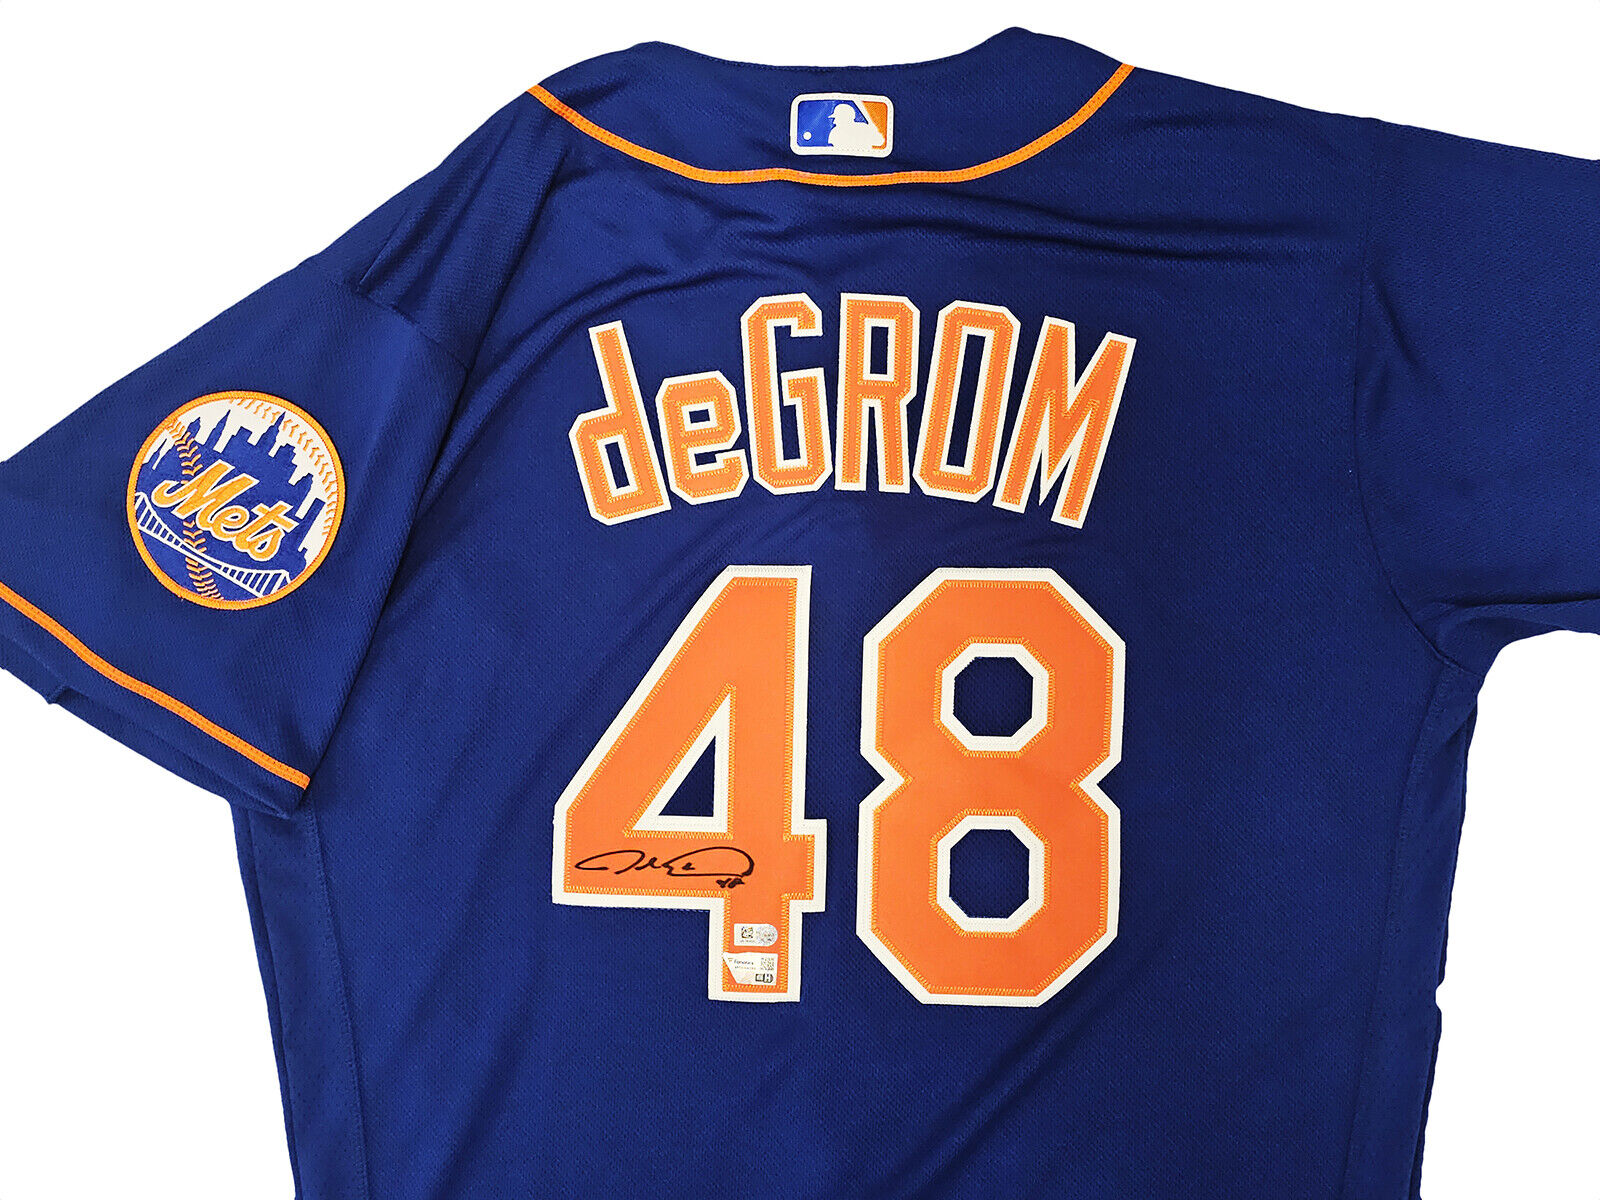 Autographed New York Mets Jacob deGrom Fanatics Authentic Nike